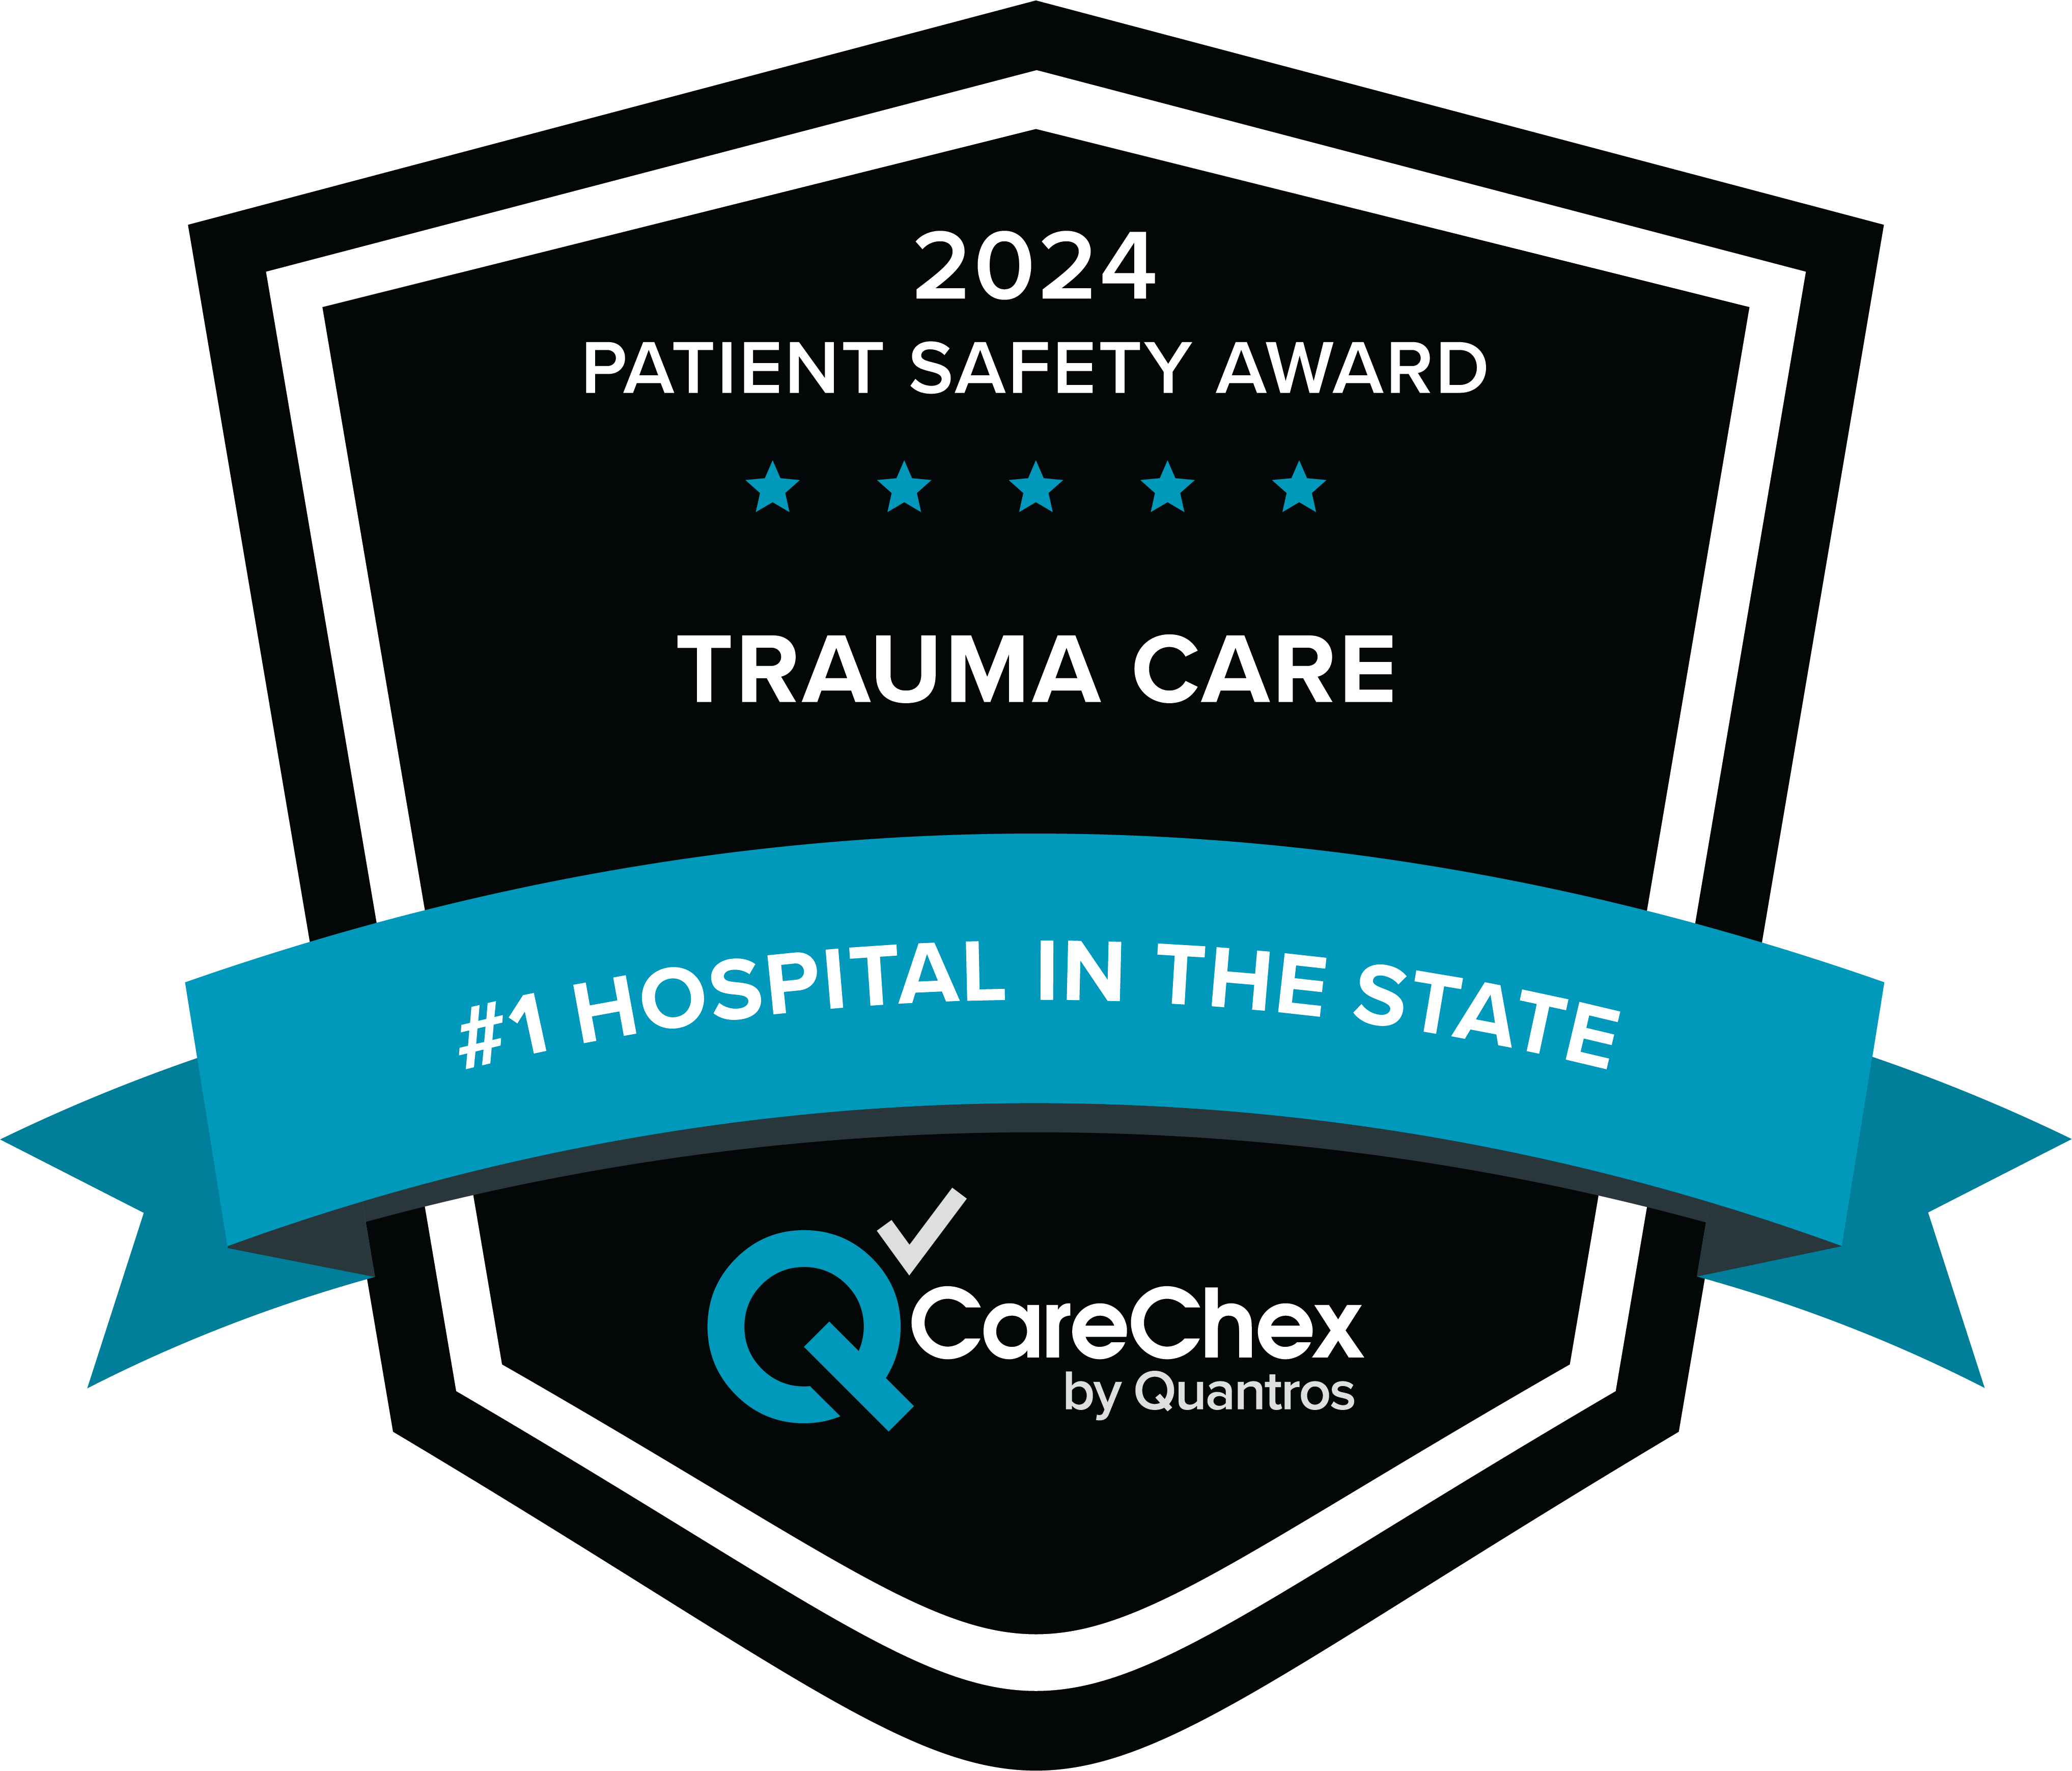 Awards badge for #1 Hospital in Tennessee for Patient Safety in Trauma Care – 2024 CareChex by Quantros